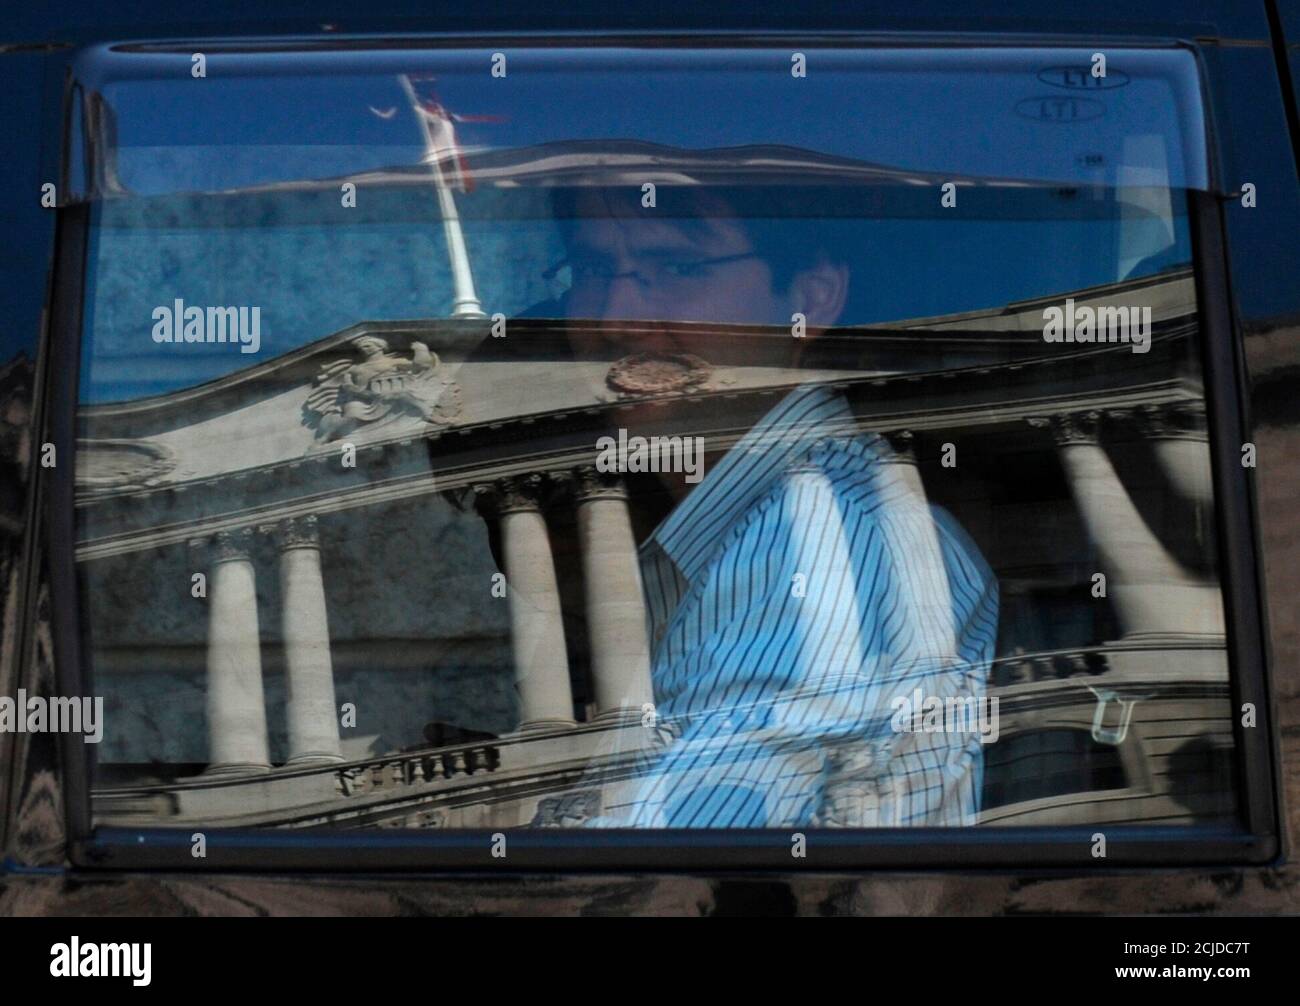 The Bank of England is reflected in a taxi window as it passes through the City of London April 23, 2010. The economic recovery lost ground in the first three months of this year as the harshest winter in three decades hit retailers and industry, official data showed on Friday. REUTERS/Toby Melville (BRITAIN - Tags: BUSINESS) Stock Photo